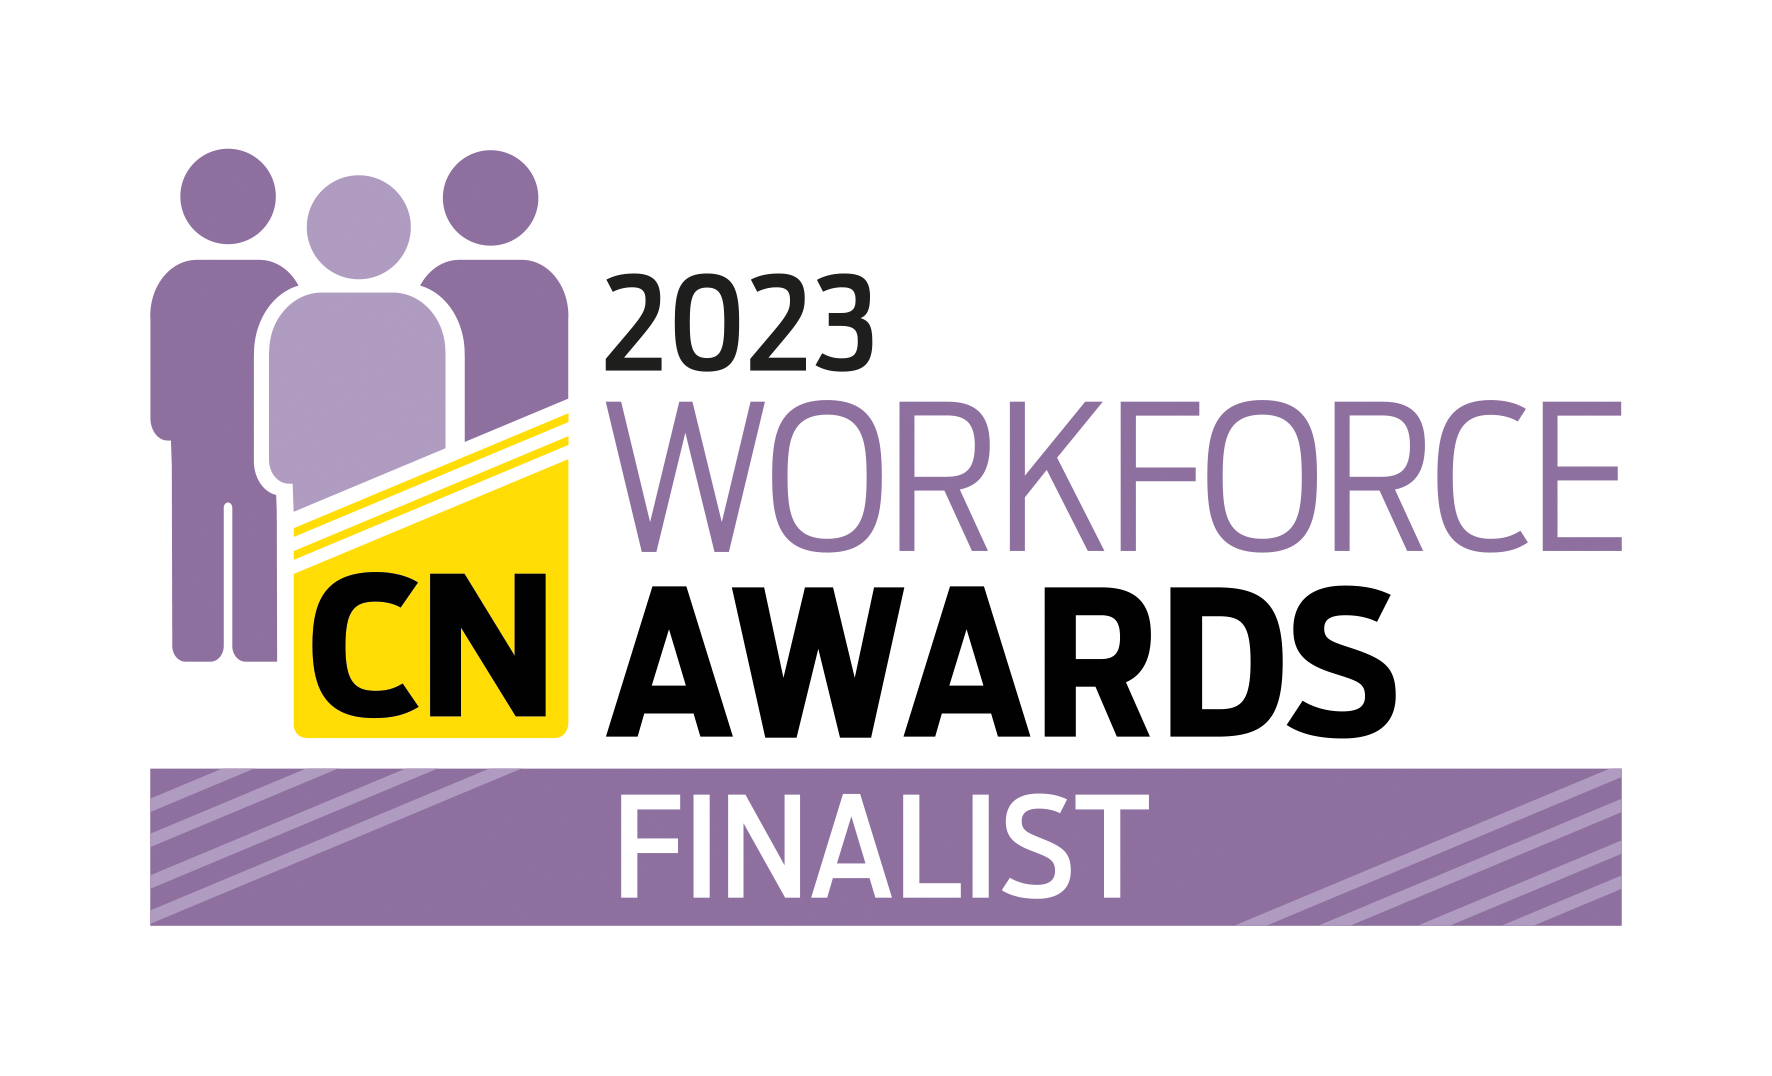 Milestone Infrastructure shortlisted for three Construction News Workforce Awards